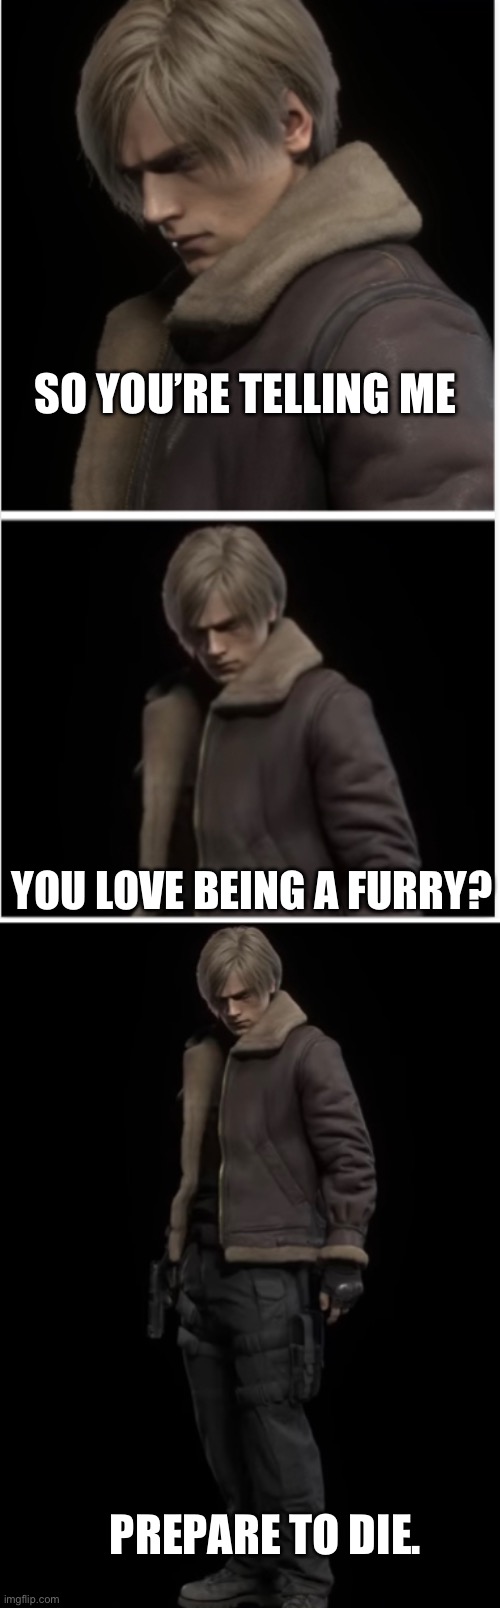 Don’t be a furry. | SO YOU’RE TELLING ME; YOU LOVE BEING A FURRY? PREPARE TO DIE. | image tagged in prepare to die- sytm sequel,anti furry,go to hell,furries,oh wow are you actually reading these tags,thanks | made w/ Imgflip meme maker